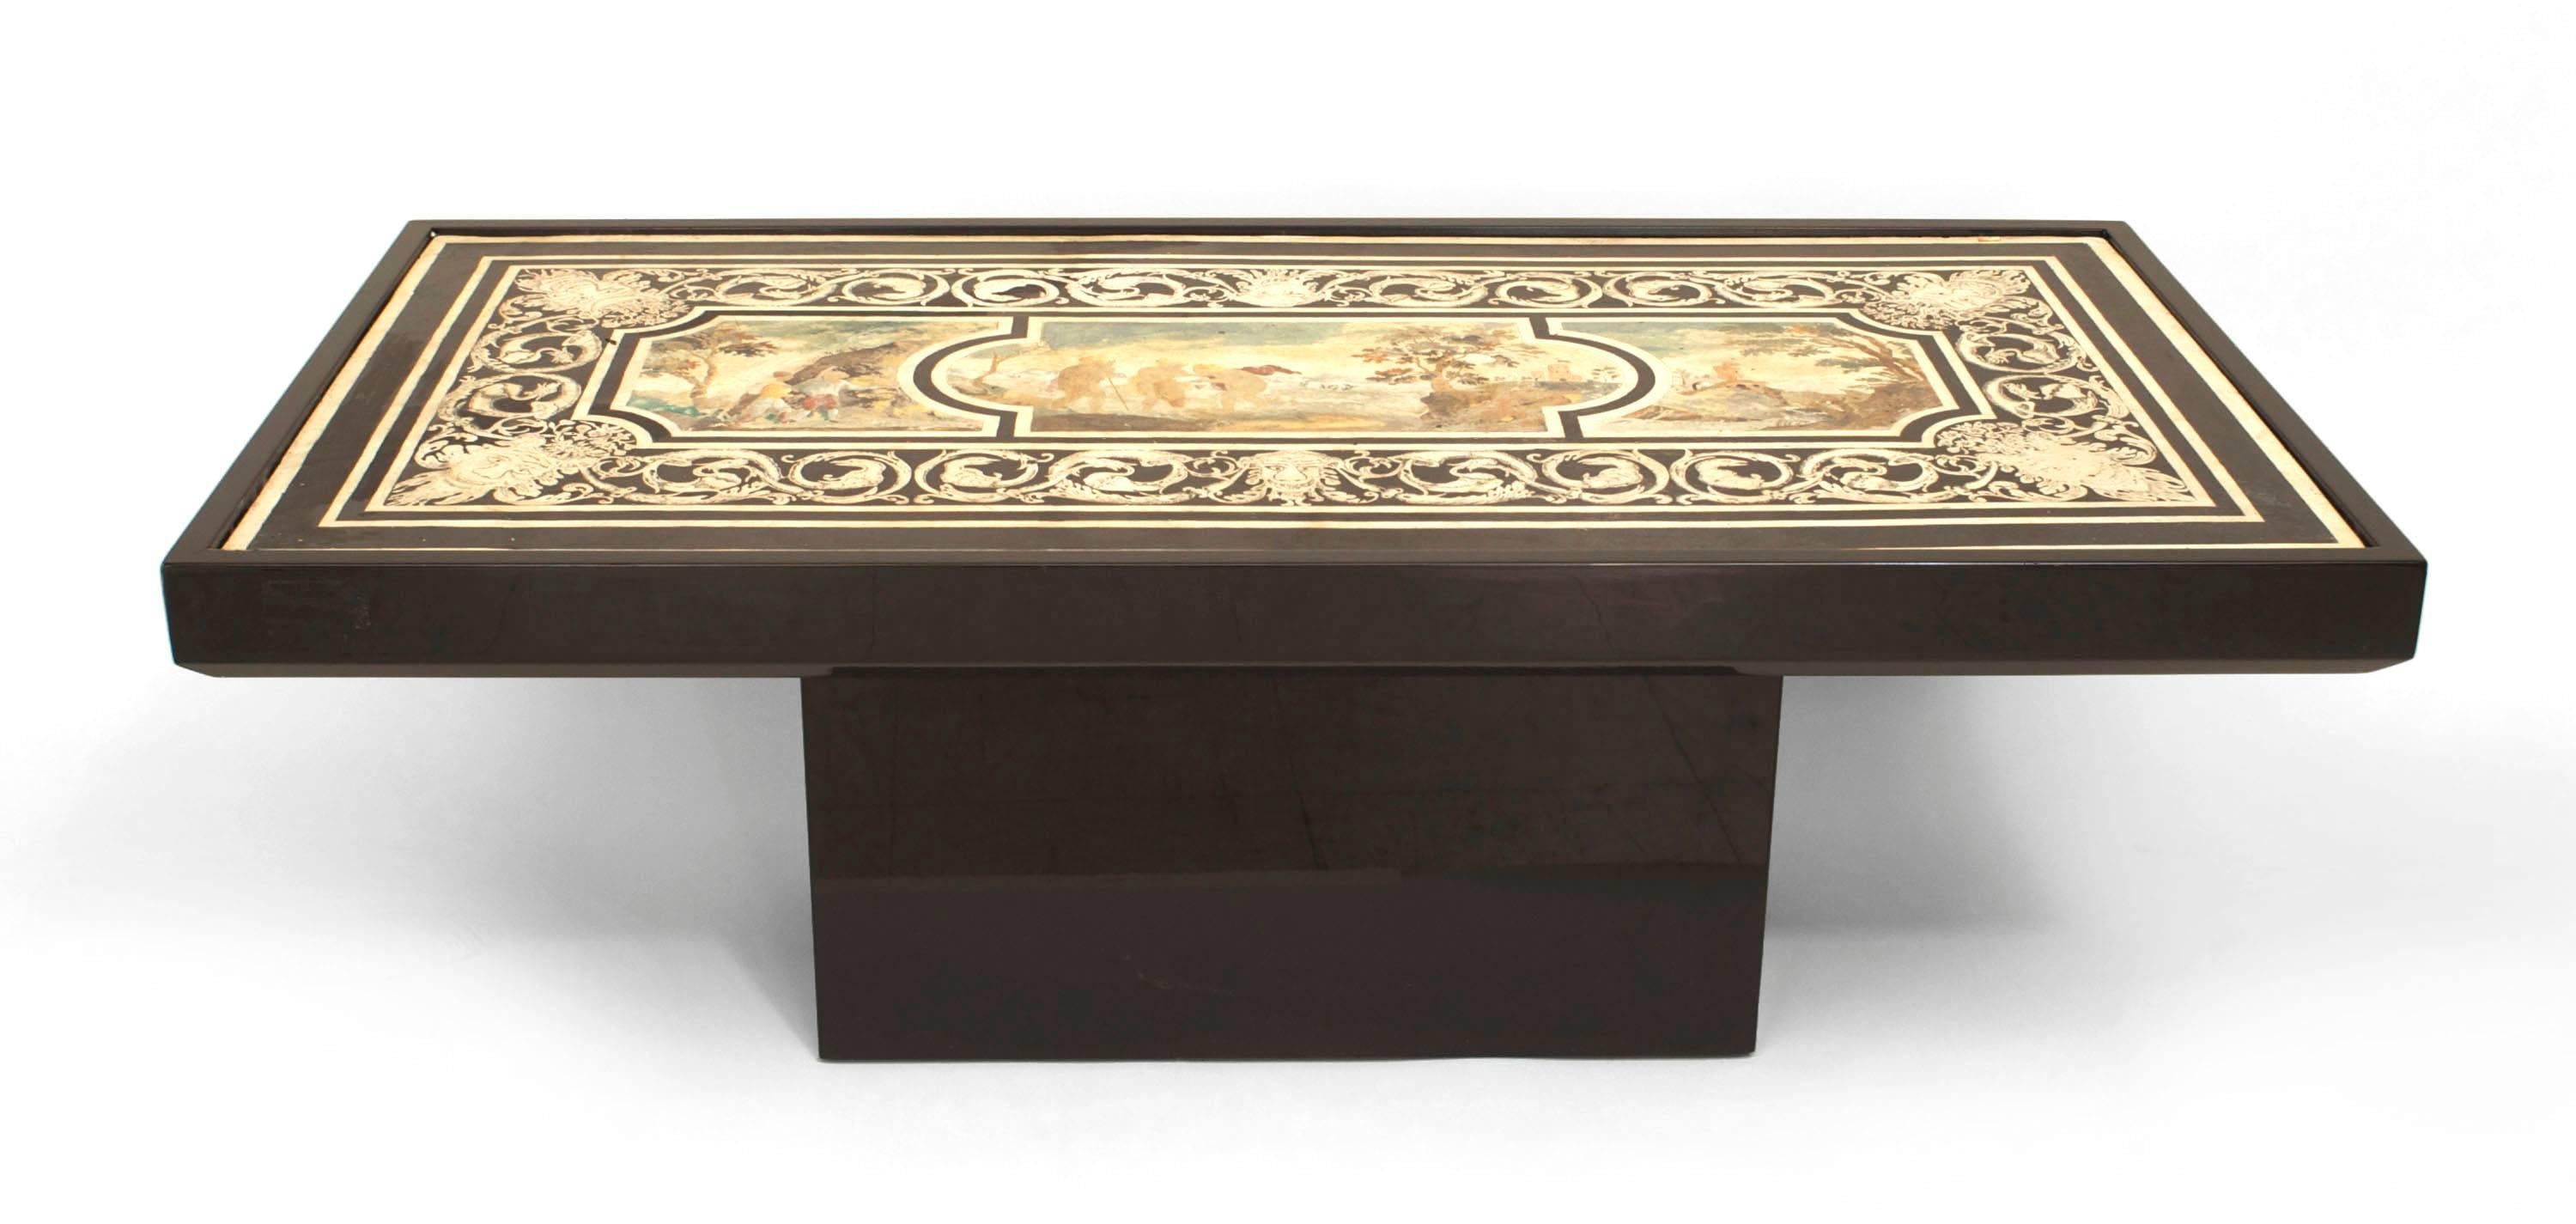 Italian Neoclassic-style scagliola table top coffee table with a centered classical scene with a black and white border on an ebonized contemporary base.
